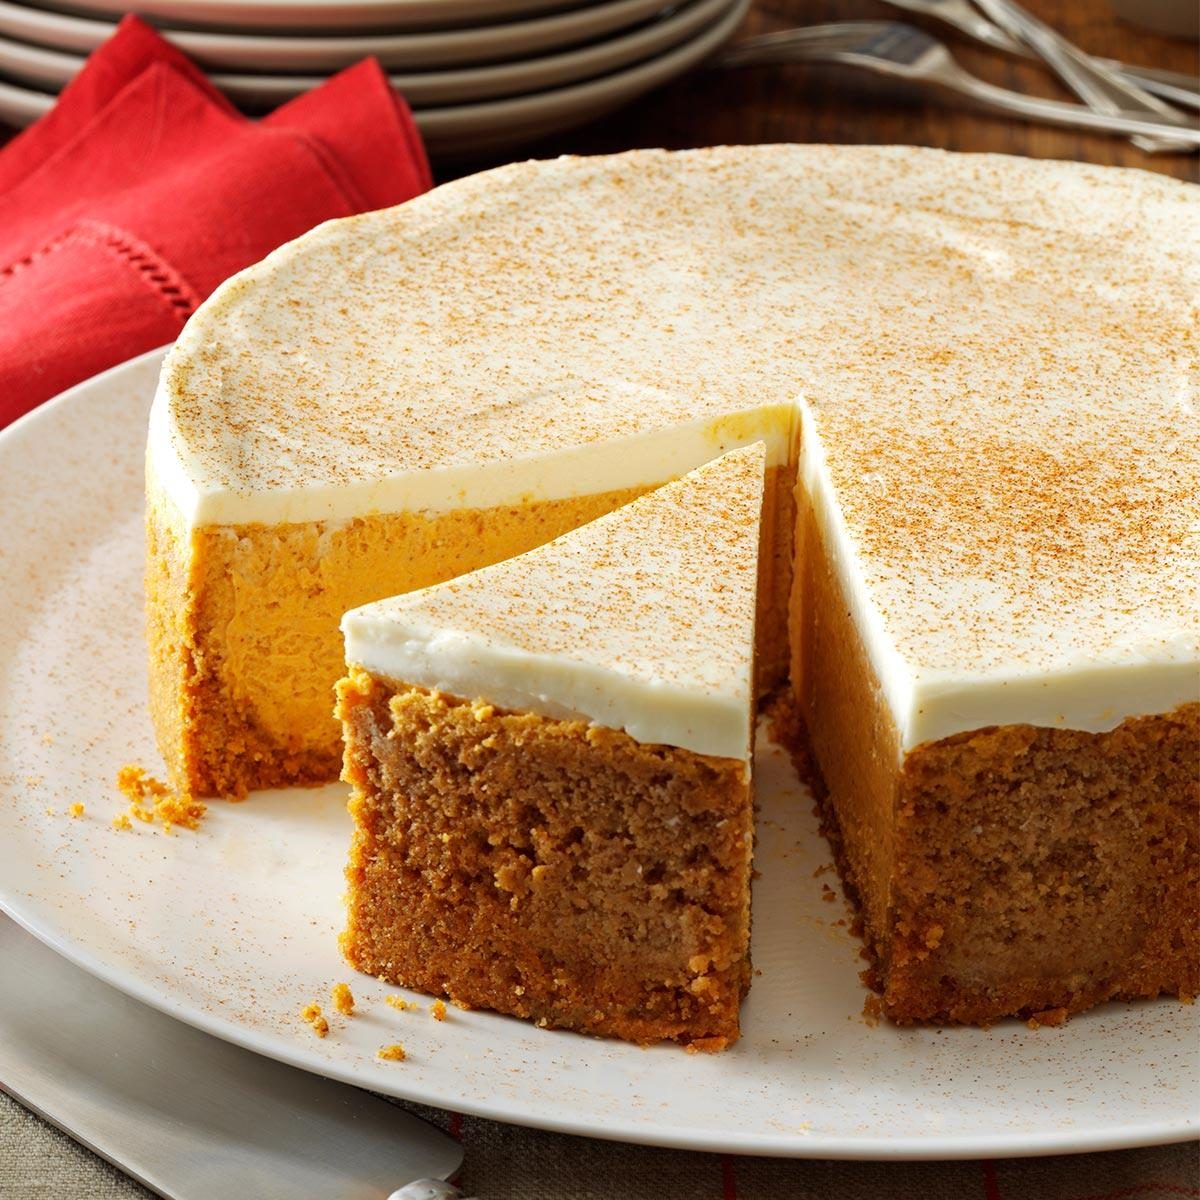 Pumpkin Cheesecake with Sour Cream Frosting